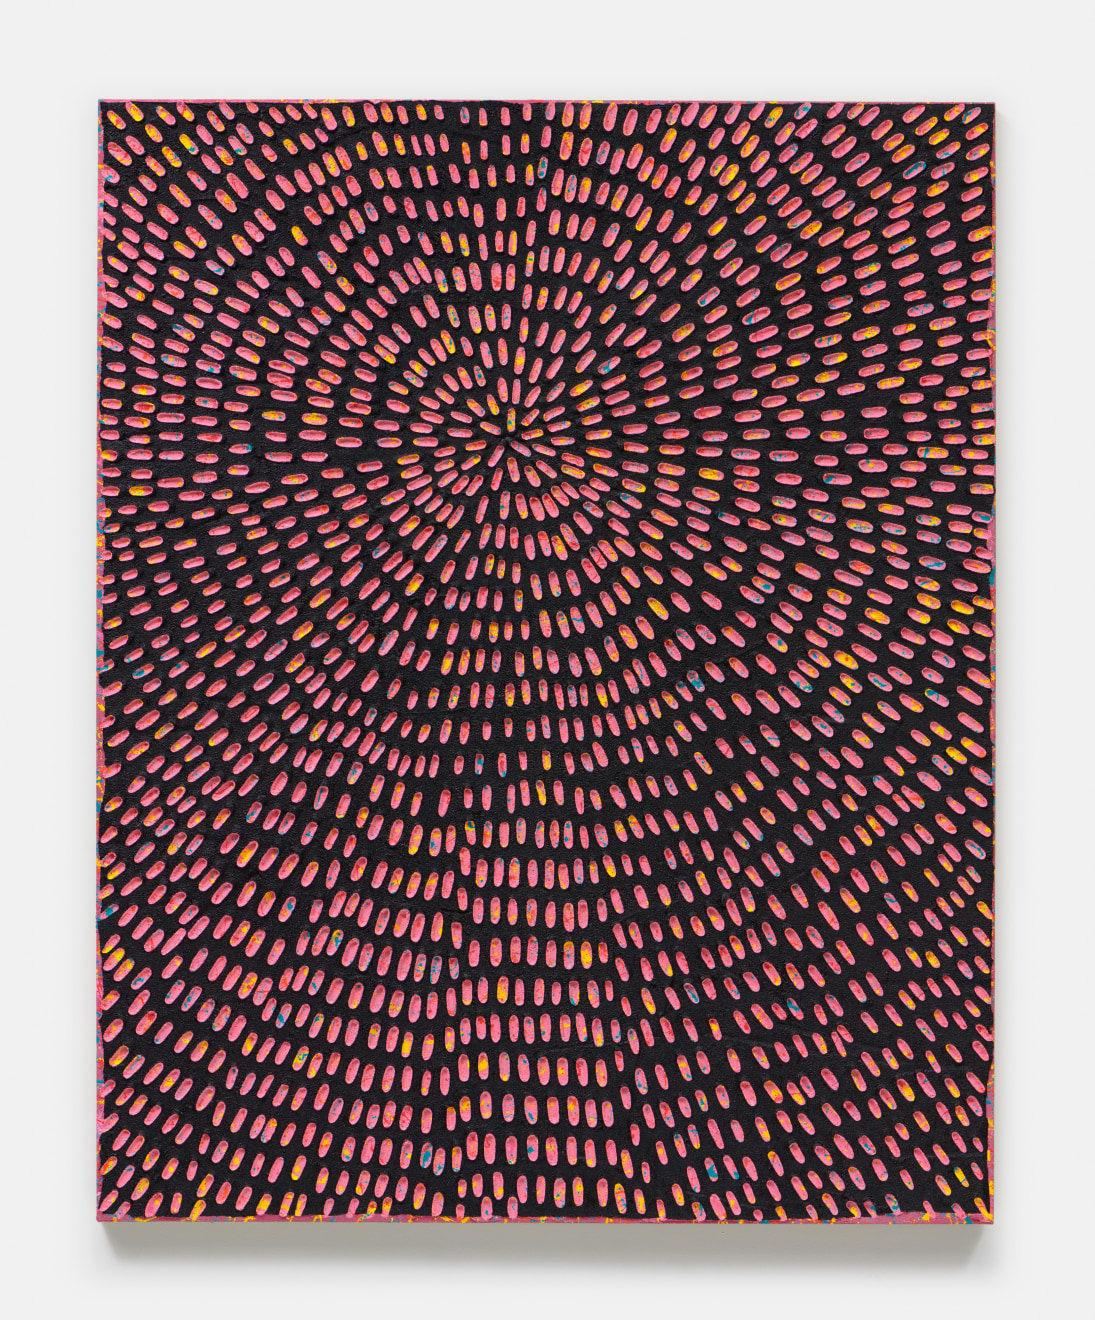 Jennifer Guidi, Awaken in Harmony (Painted Black, Painted Pink Sand, Natural Ground with Yellow, Blue, Pink and Orange), 2021